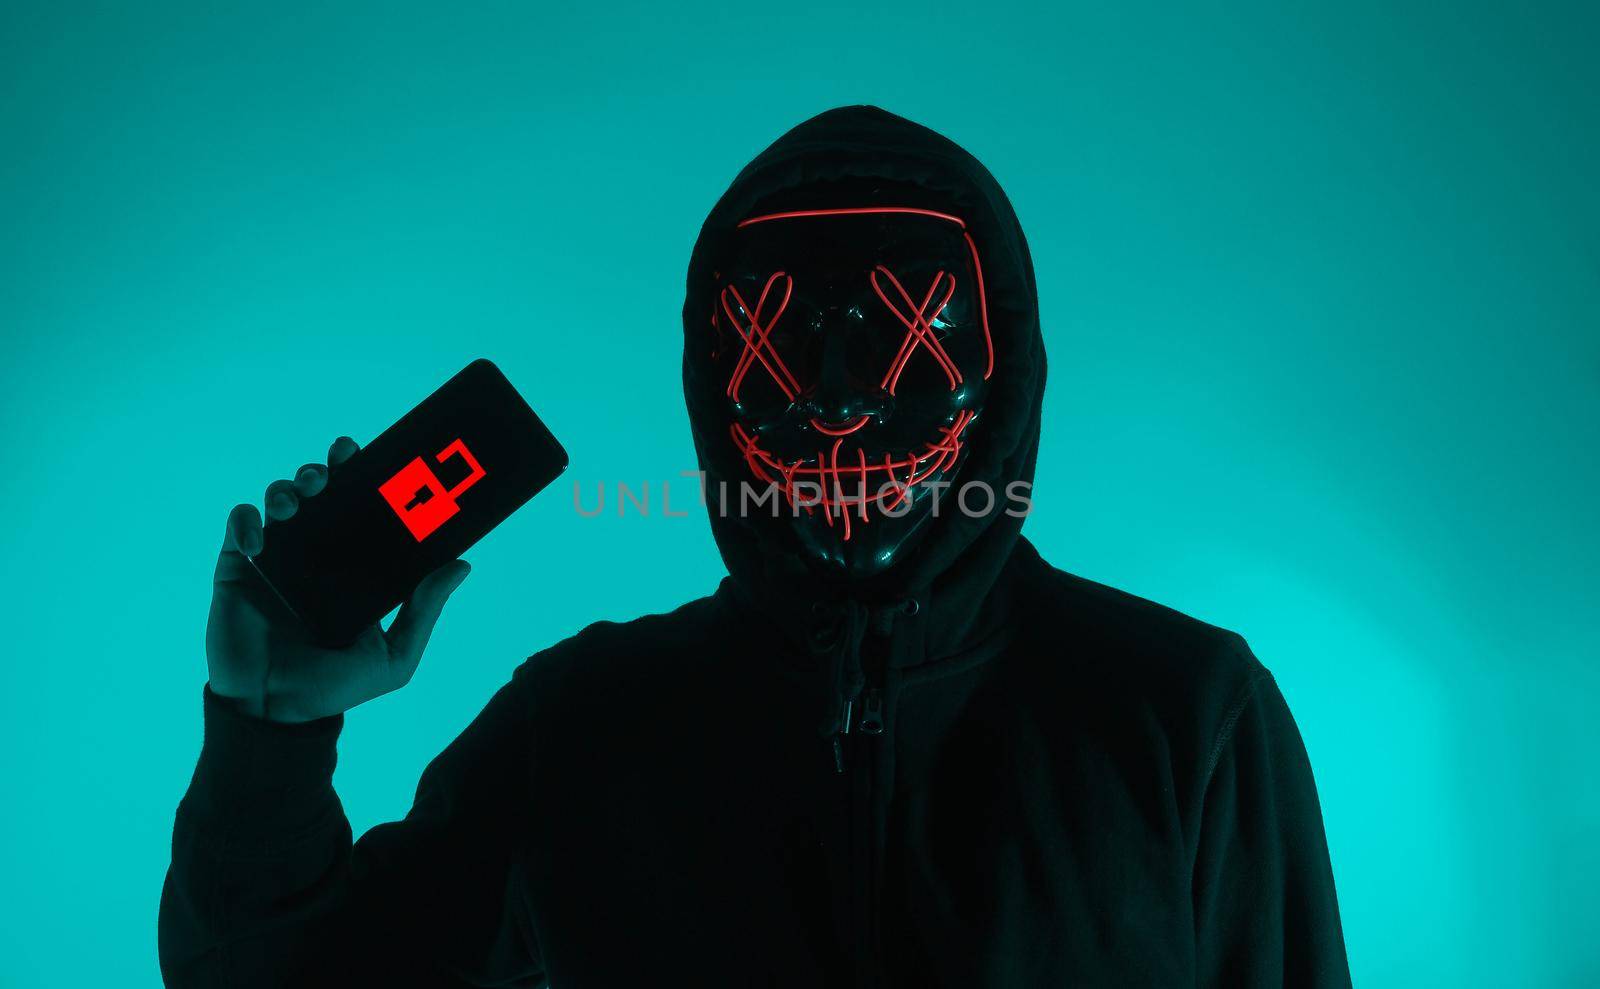 Digital security Concept. Anonymous hacker with mask holding smartphone hacked. Personal and Cyber data security in mobile phone stolen by man in mask. Represent digital privacy protection concept.